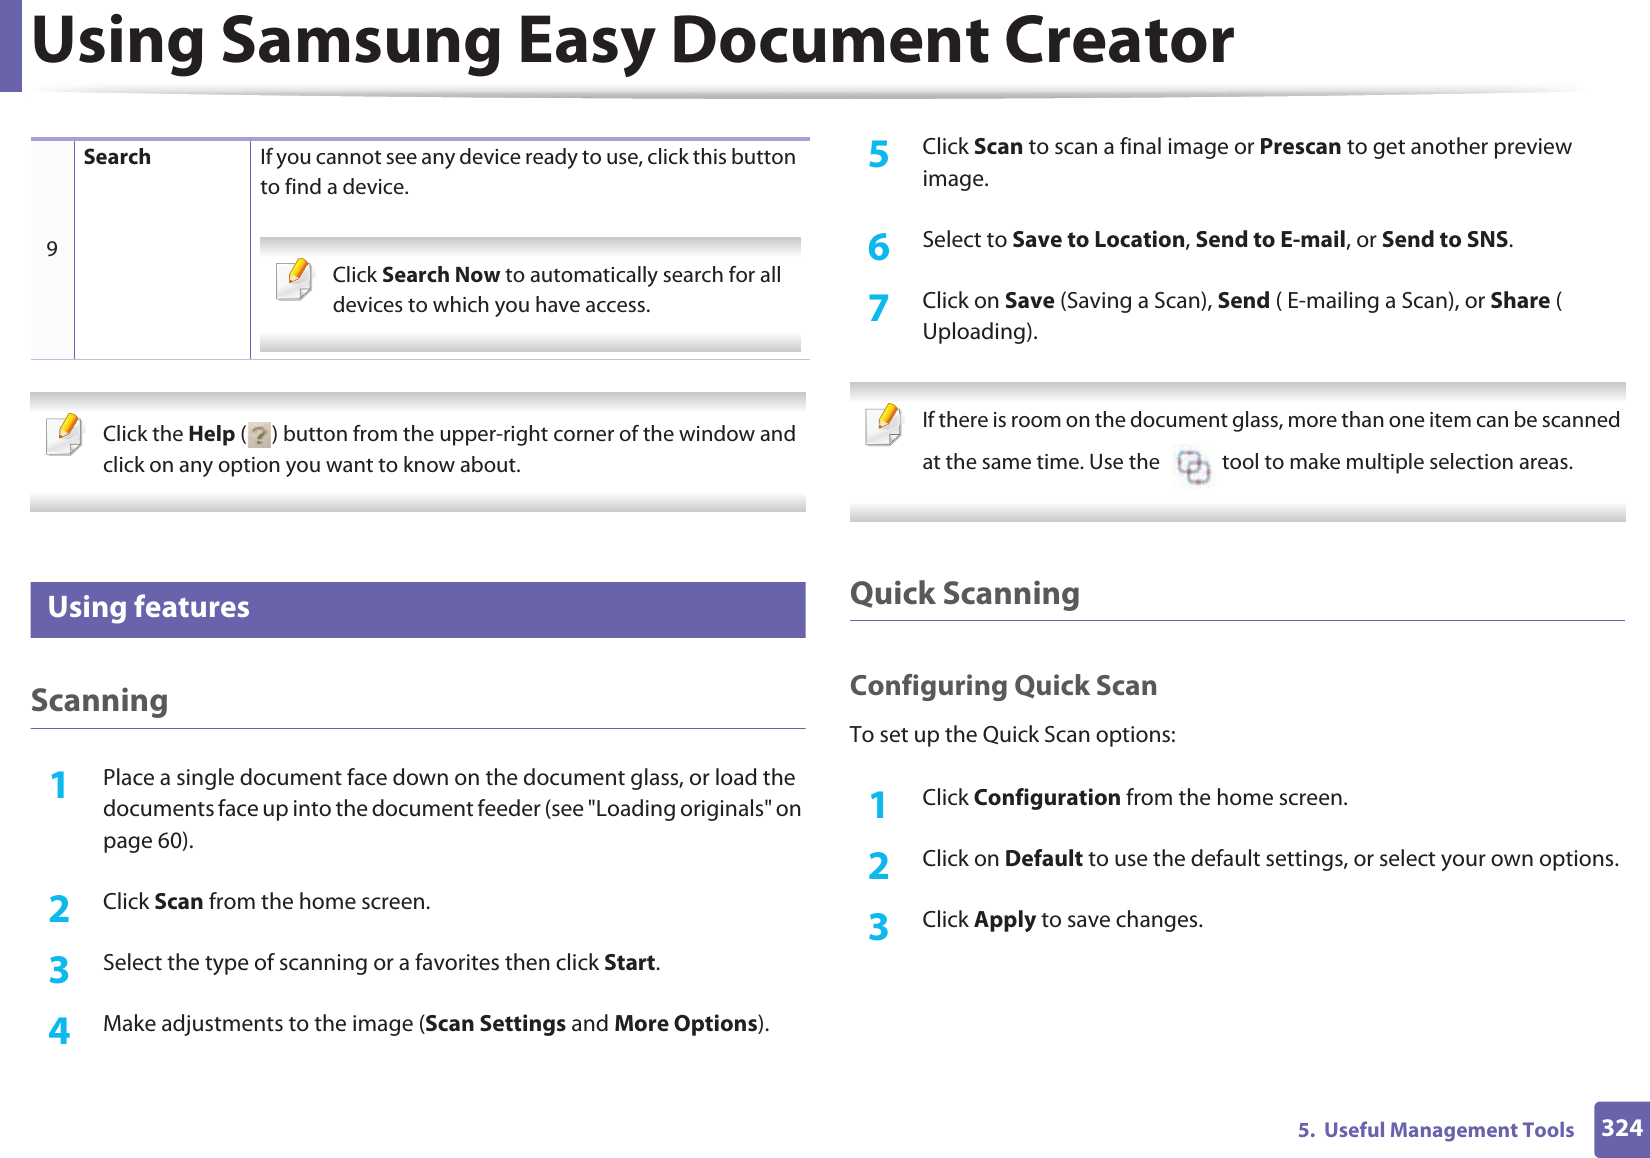 Using Samsung Easy Document Creator3245.  Useful Management Tools Click the Help ( ) button from the upper-right corner of the window and click on any option you want to know about.  6 Using featuresScanning1Place a single document face down on the document glass, or load the documents face up into the document feeder (see &quot;Loading originals&quot; on page 60).2  Click Scan from the home screen.3  Select the type of scanning or a favorites then click Start.4  Make adjustments to the image (Scan Settings and More Options).5  Click Scan to scan a final image or Prescan to get another preview image.6  Select to Save to Location, Send to E-mail, or Send to SNS.7  Click on Save (Saving a Scan), Send ( E-mailing a Scan), or Share ( Uploading). If there is room on the document glass, more than one item can be scanned at the same time. Use the    tool to make multiple selection areas. Quick ScanningConfiguring Quick ScanTo set up the Quick Scan options:1Click Configuration from the home screen.2  Click on Default to use the default settings, or select your own options.3  Click Apply to save changes.9Search If you cannot see any device ready to use, click this button to find a device. Click Search Now to automatically search for all devices to which you have access. 